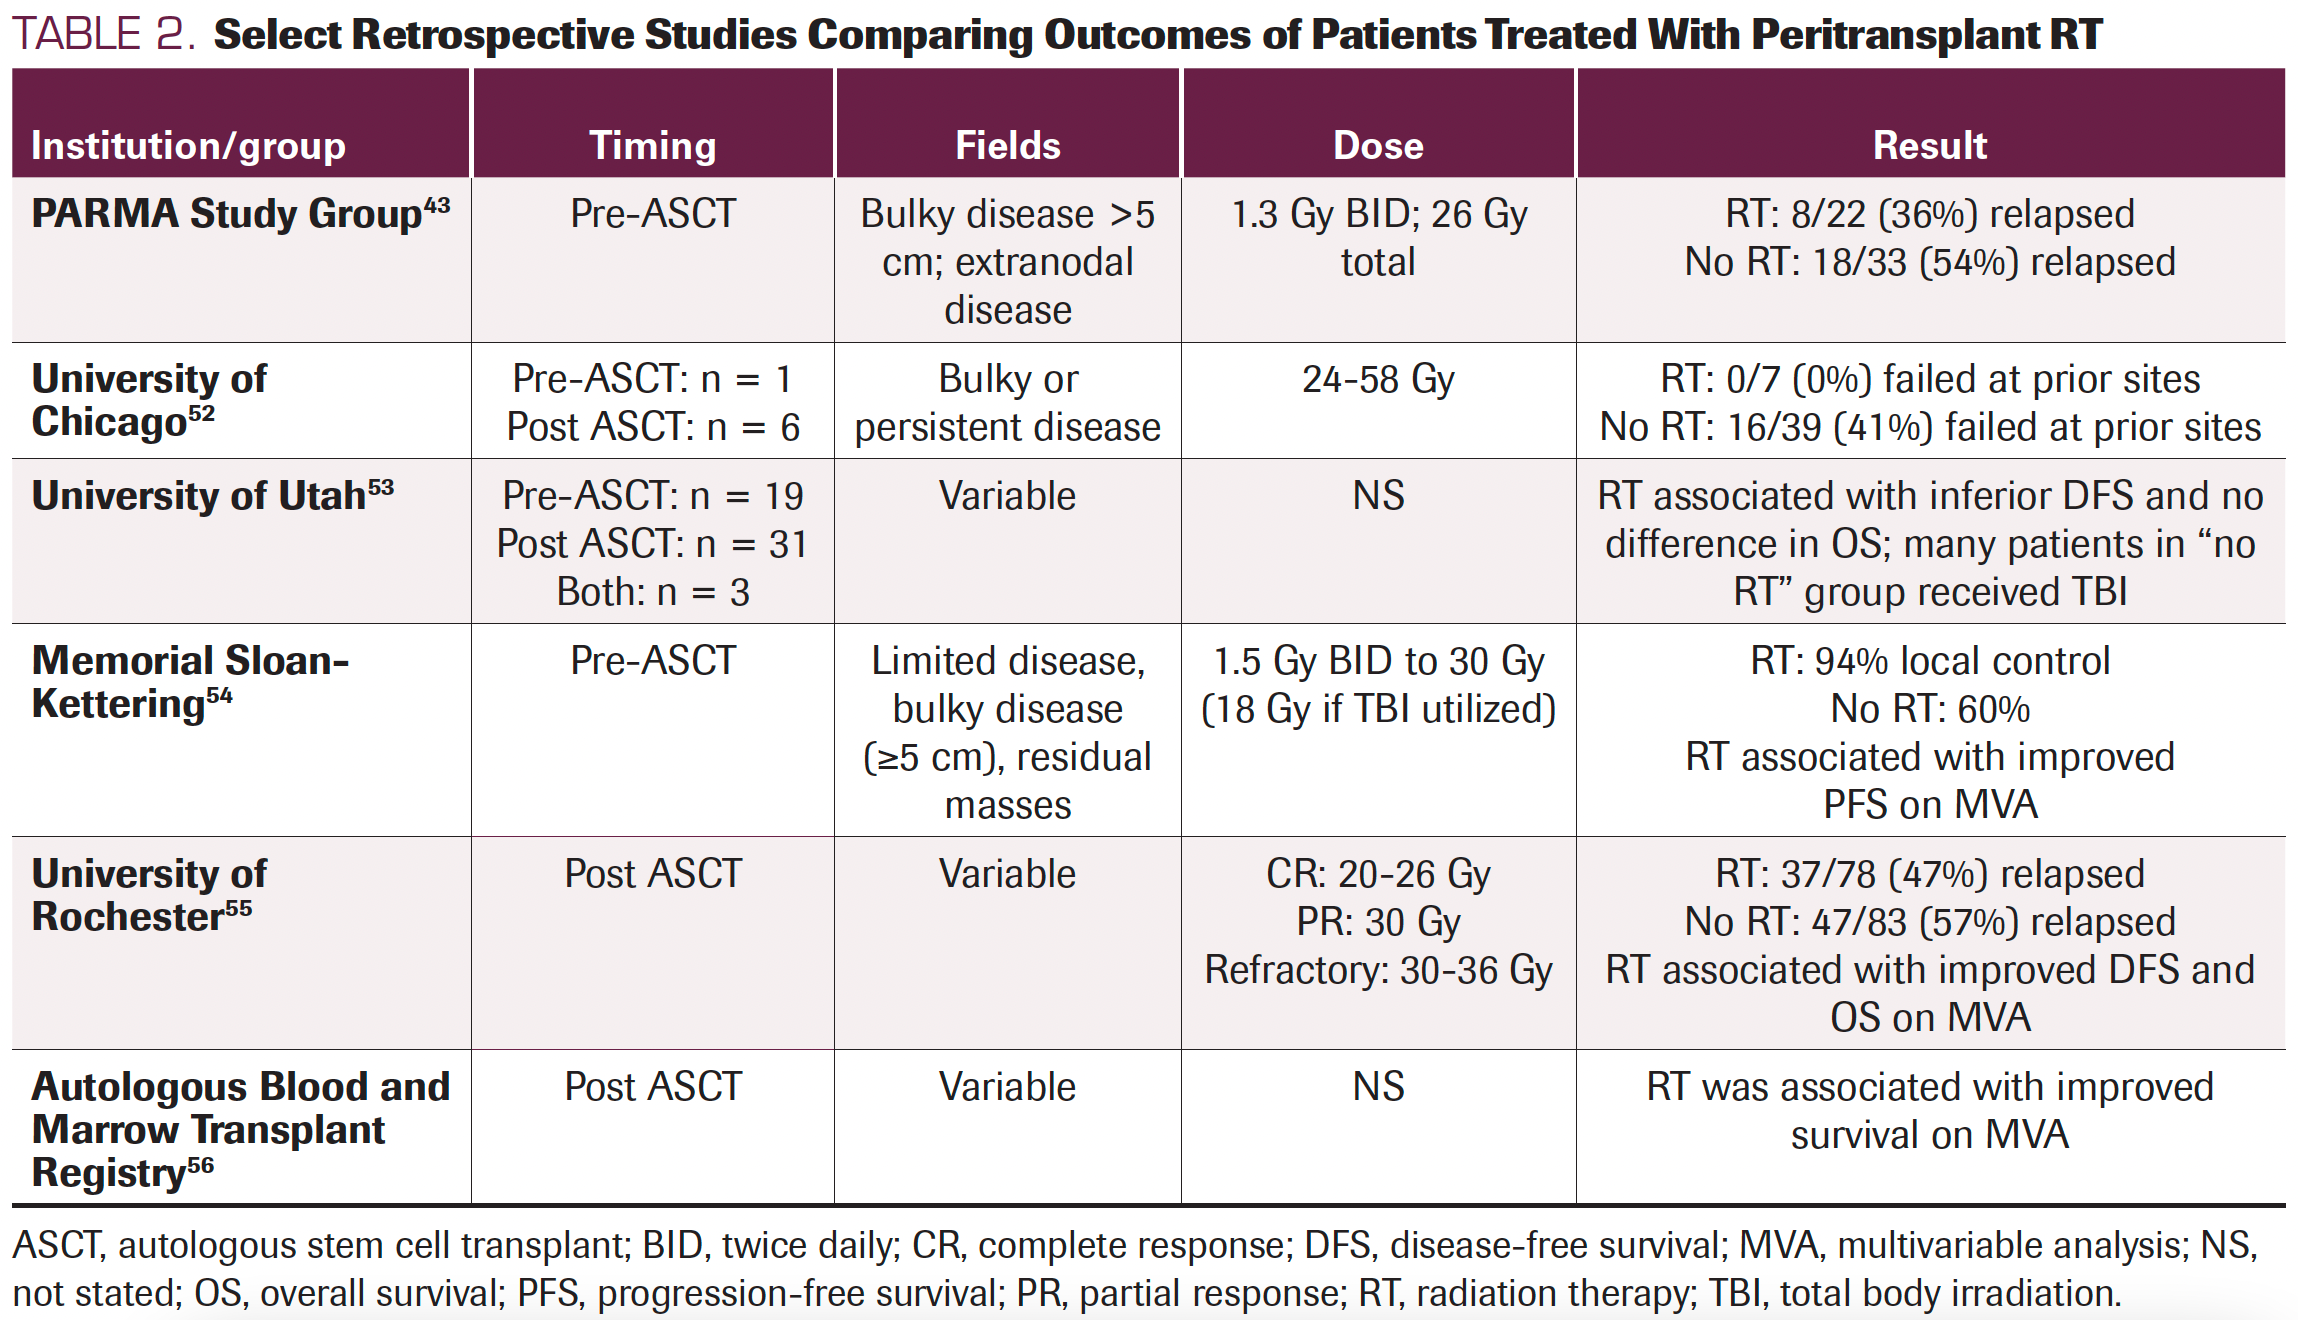 TABLE 2. Select Retrospective Studies Comparing Outcomes of Patients Treated With Peritransplant RT